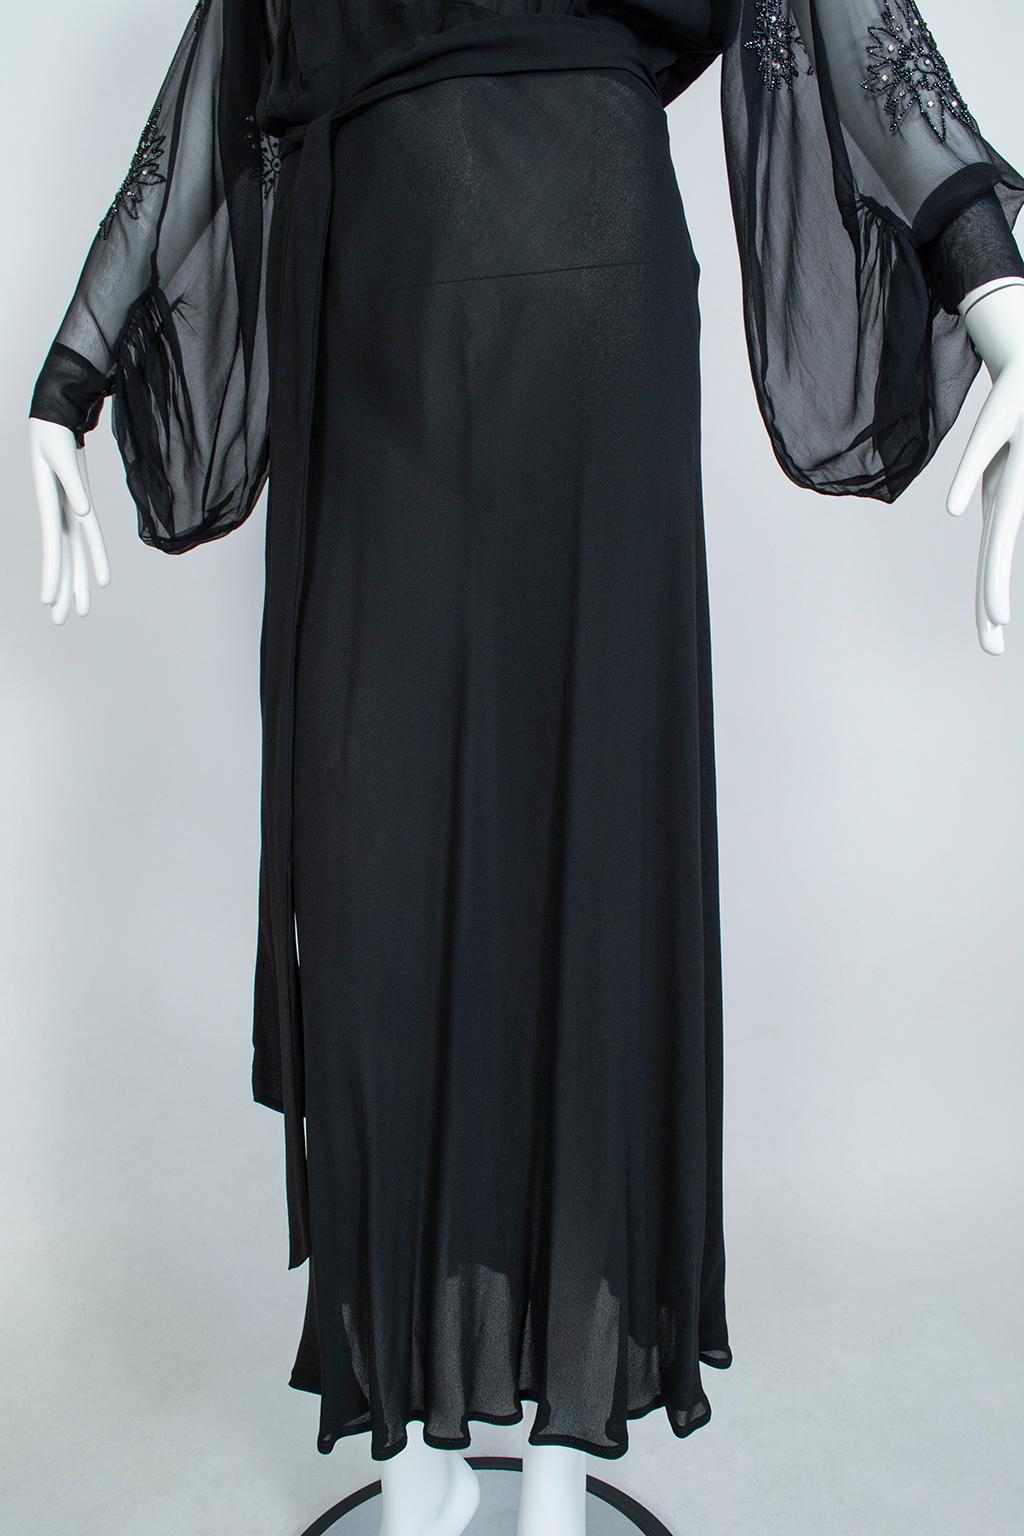 Sheer Black Crystal Bead and Crêpe Illusion Gown with Bellows Sleeves - M, 1930s 9